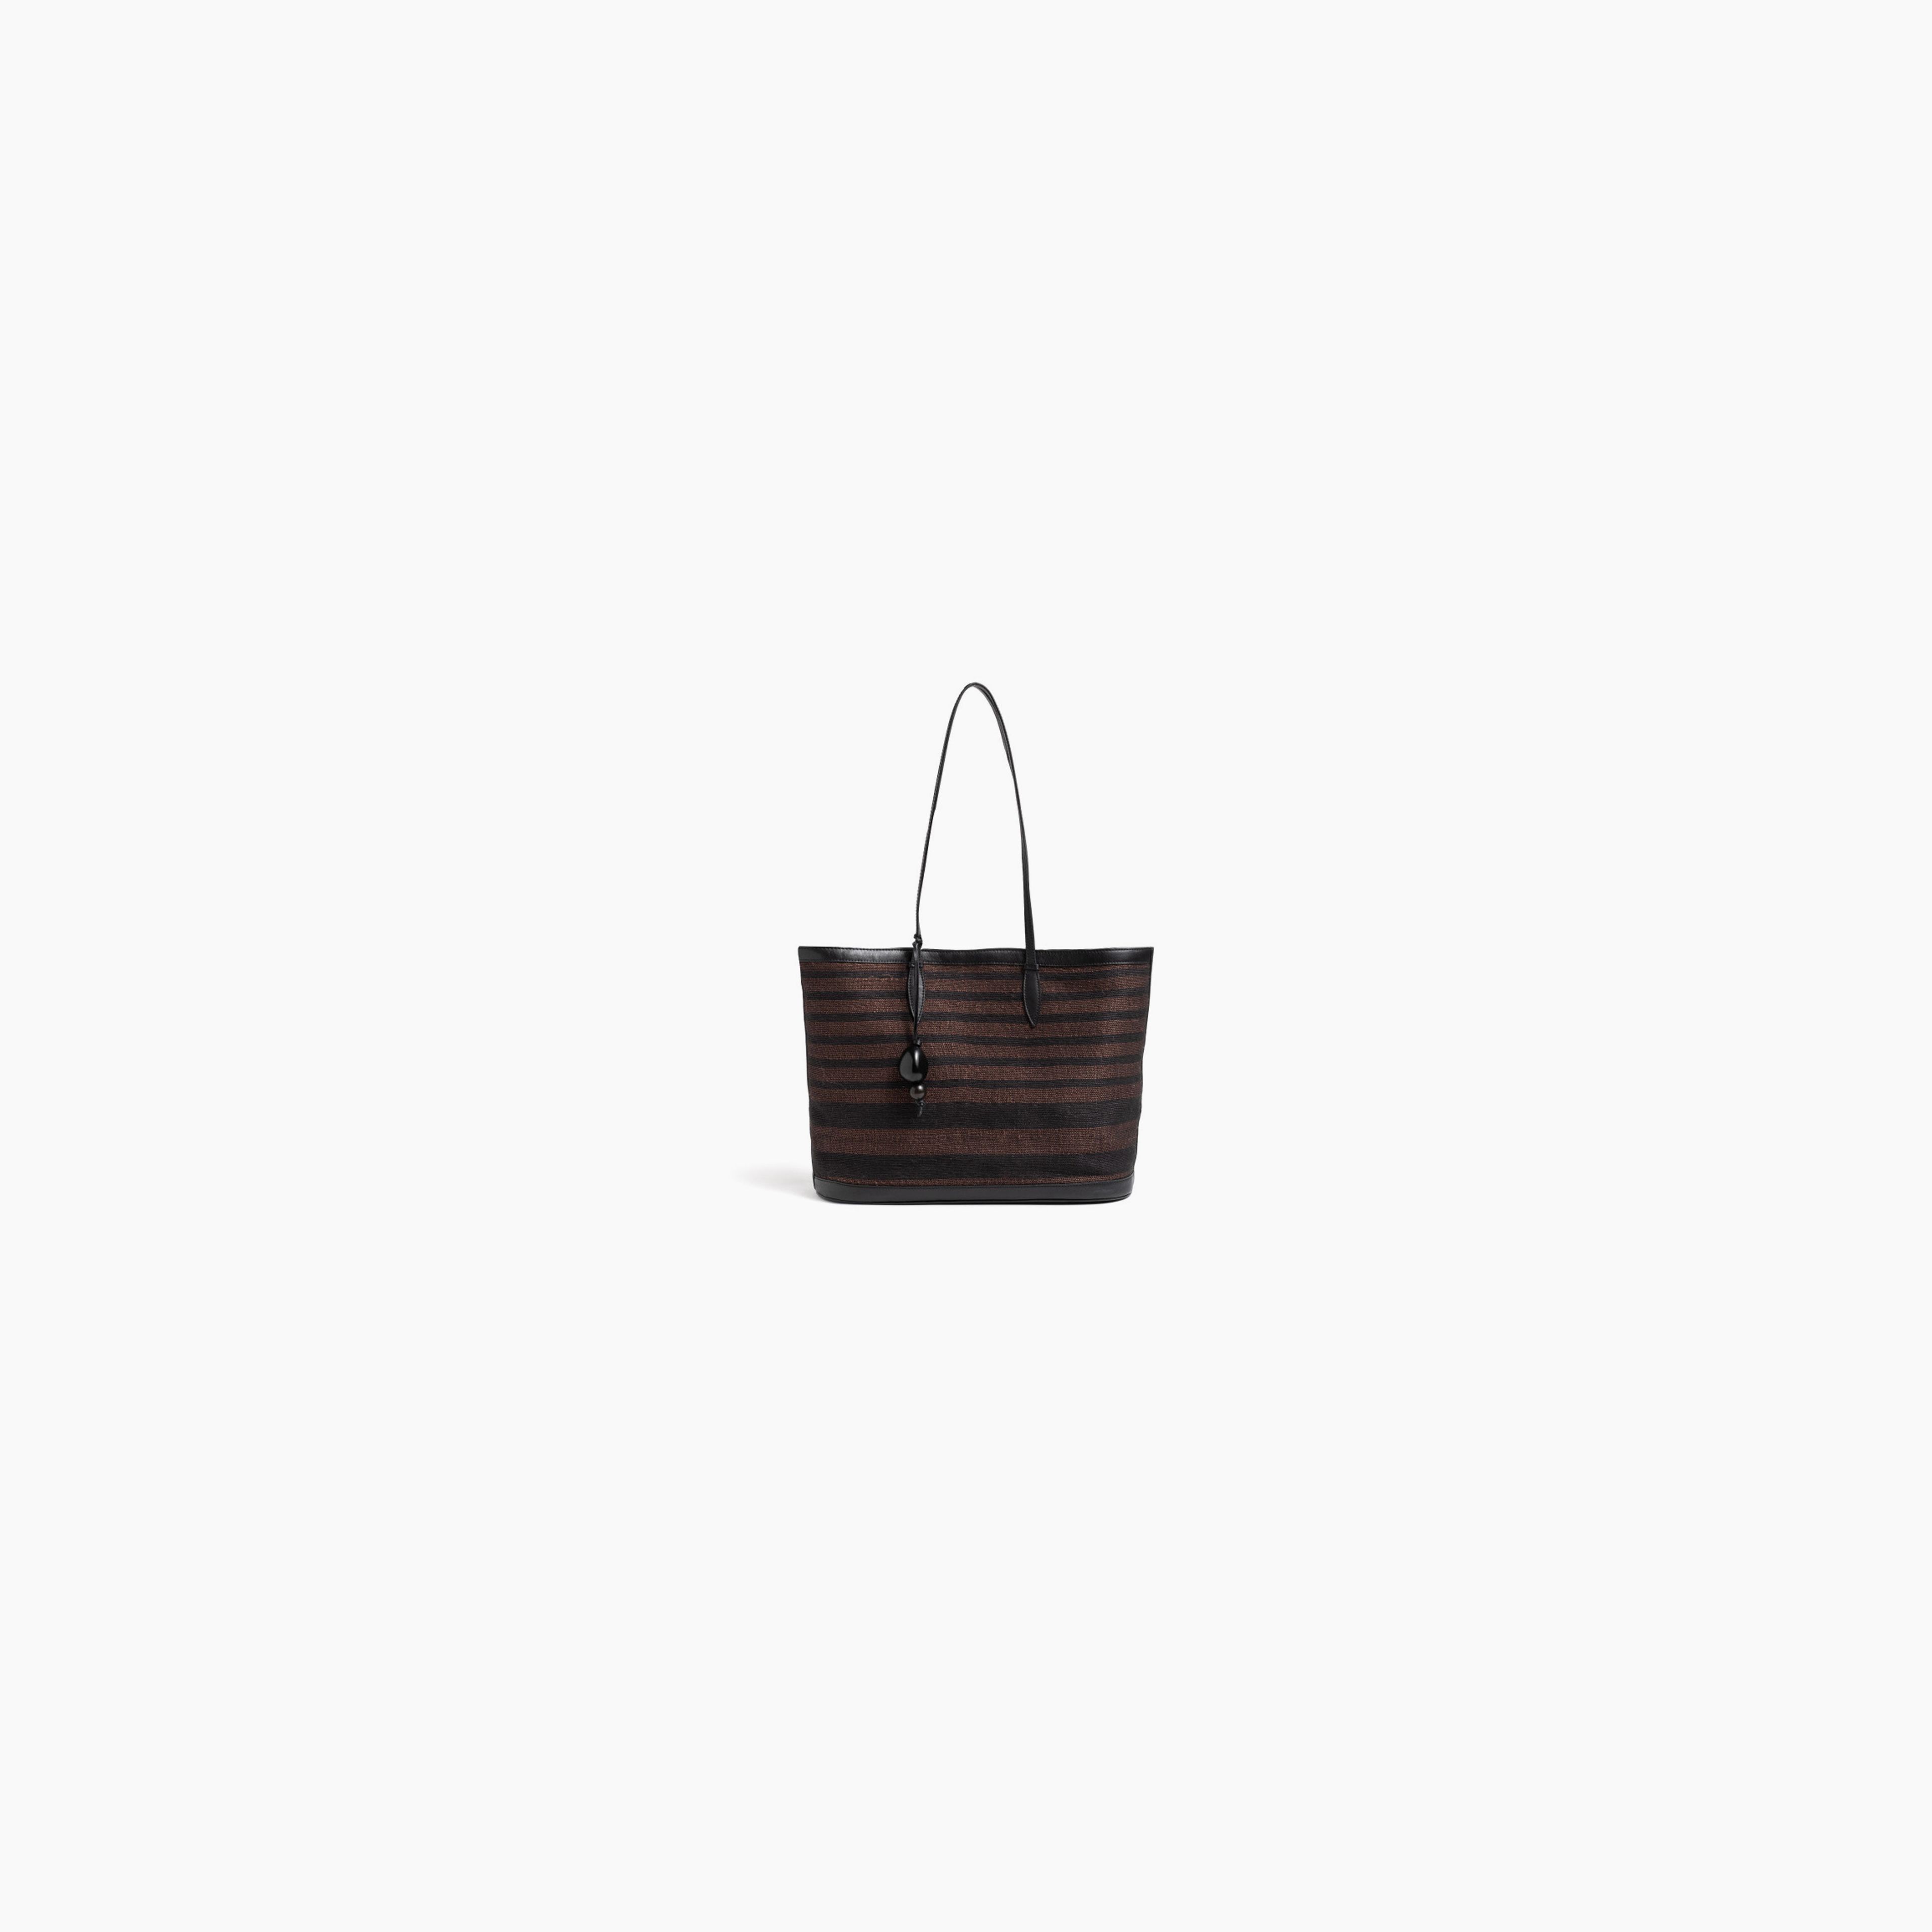 The Tote in Woven Natural Fiber